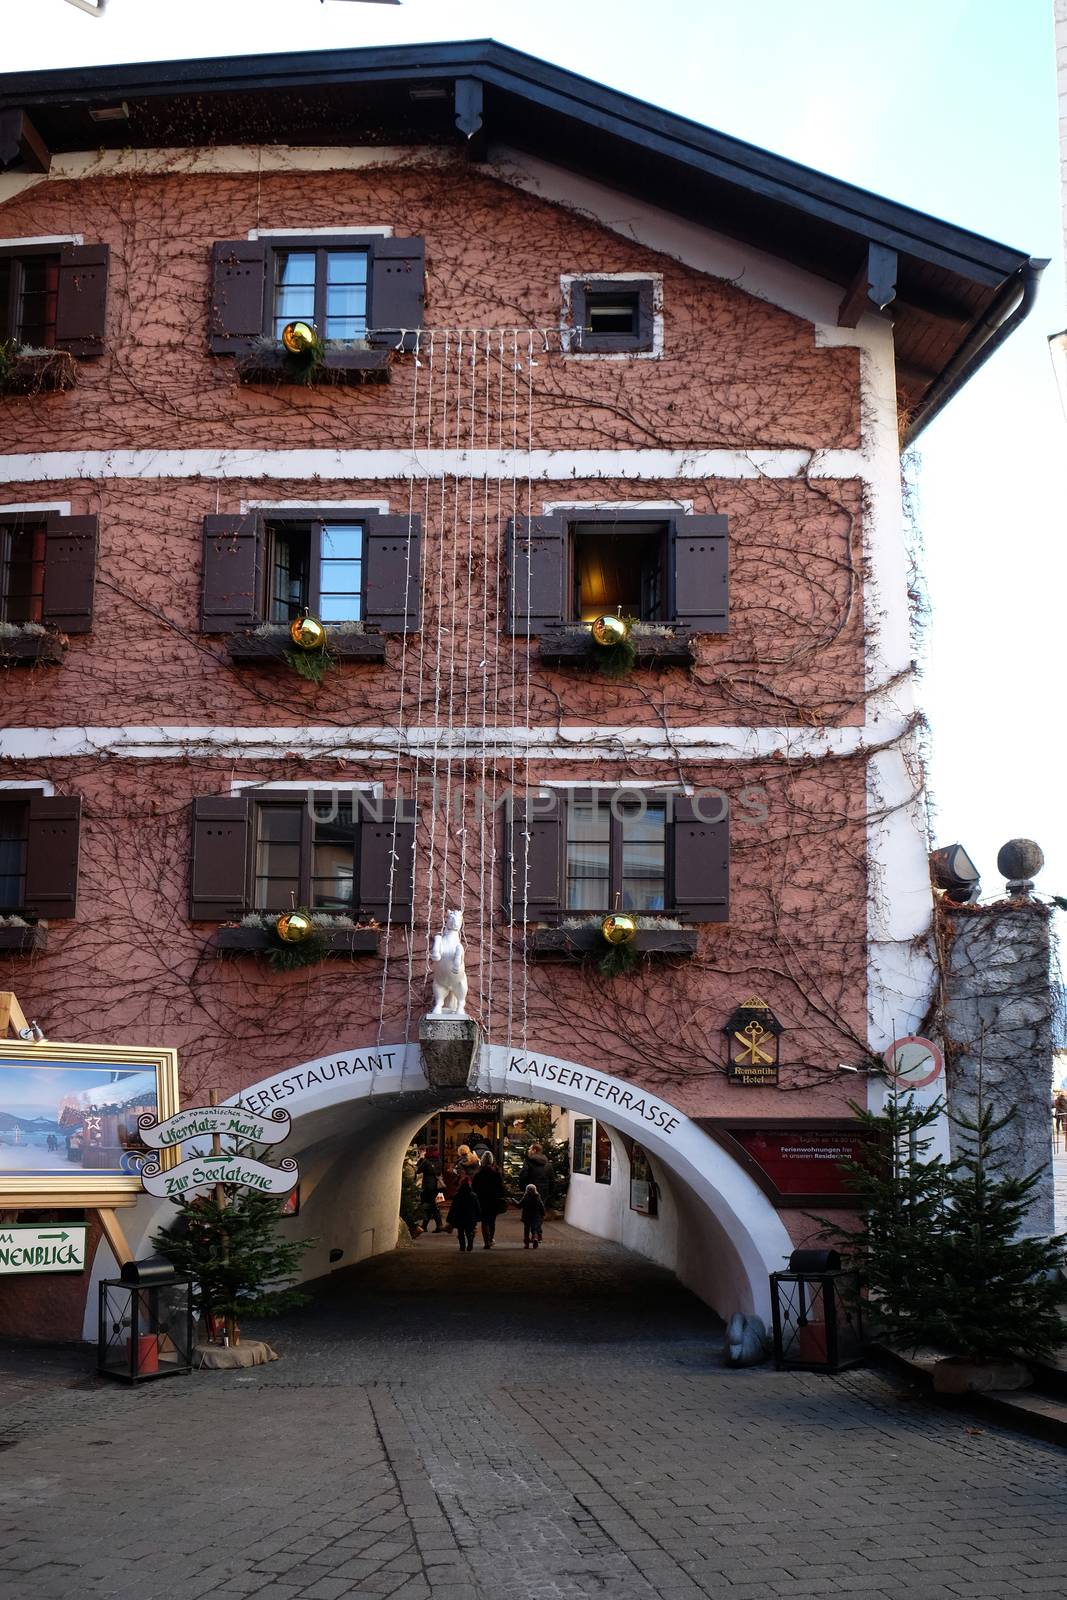 Christmas decoration on the building in St. Wolfgang on Wolfgangsee in Austria by atlas